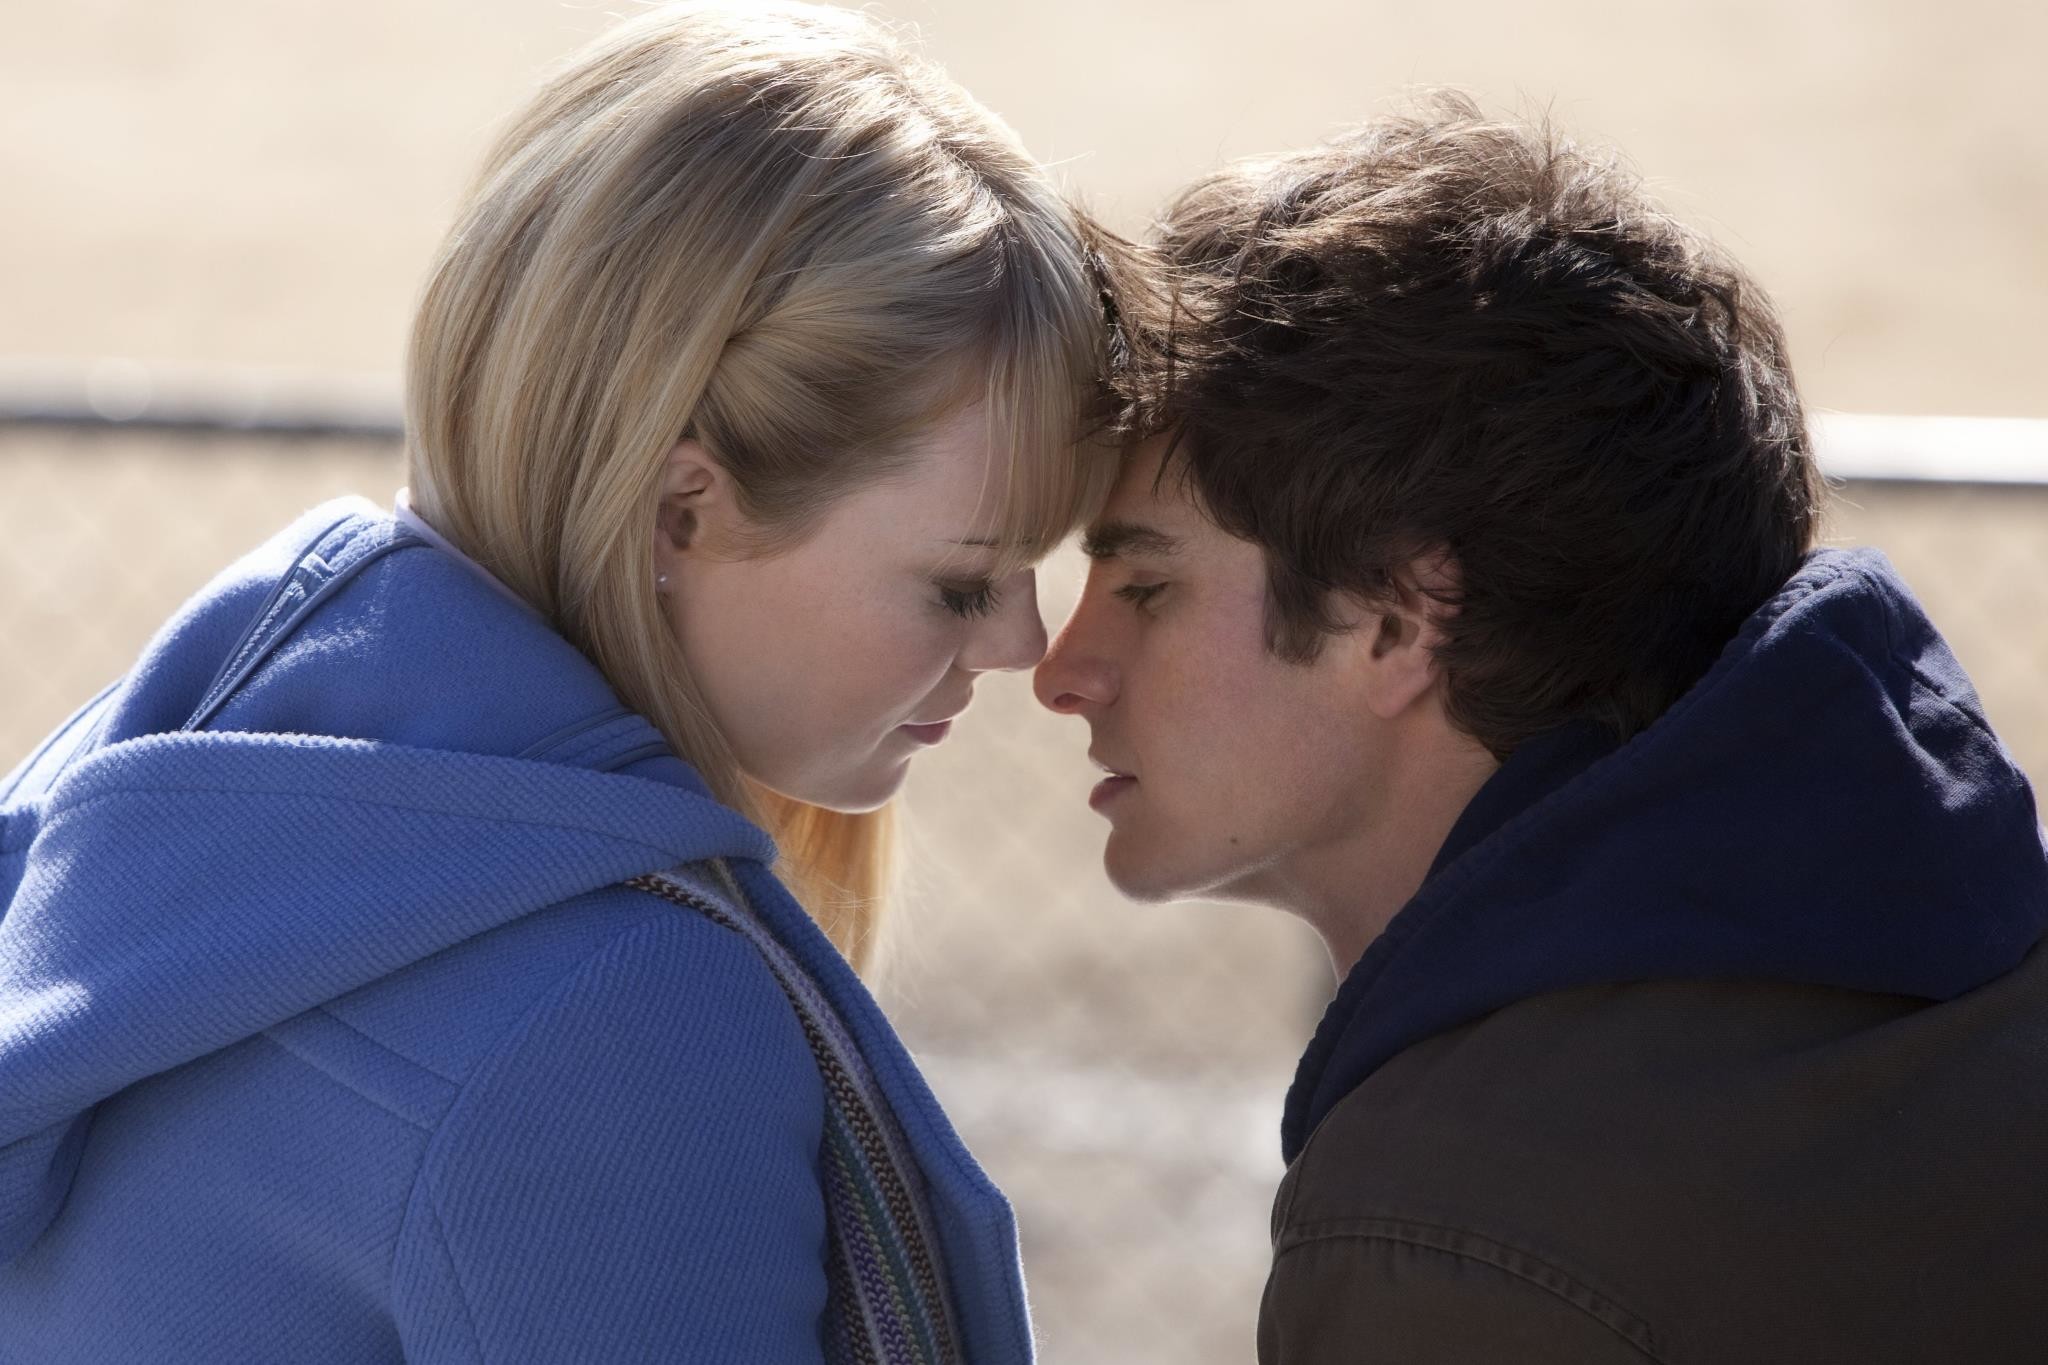 2048x1365 Peter Parker and Gwen Stacy share a moment in New Image from The Amazing  Spider-Man